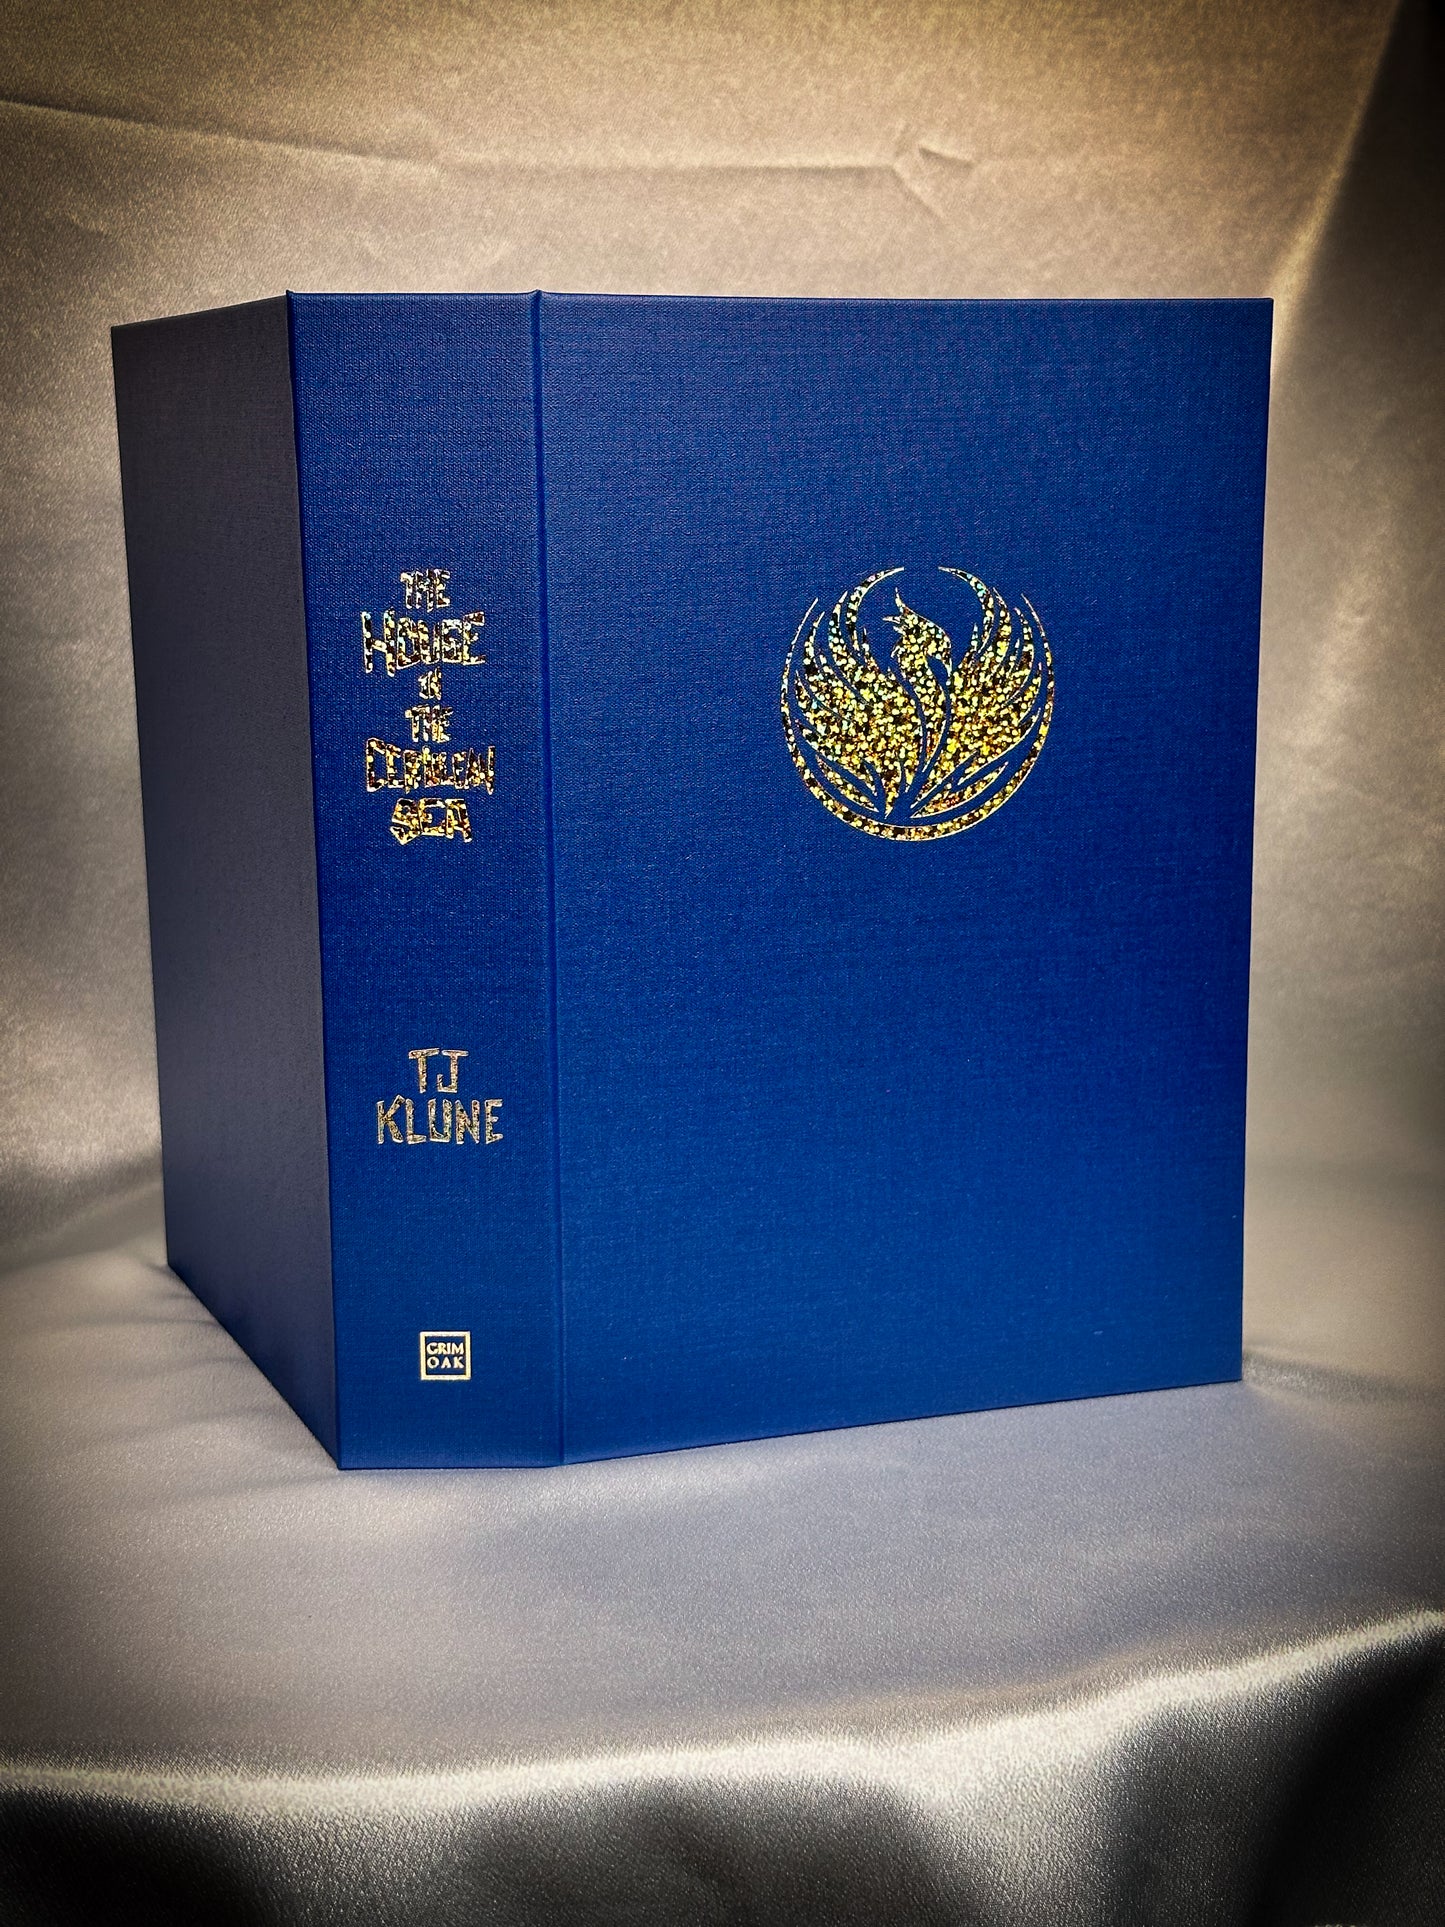 The House in the Cerulean Sea Lettered Edition